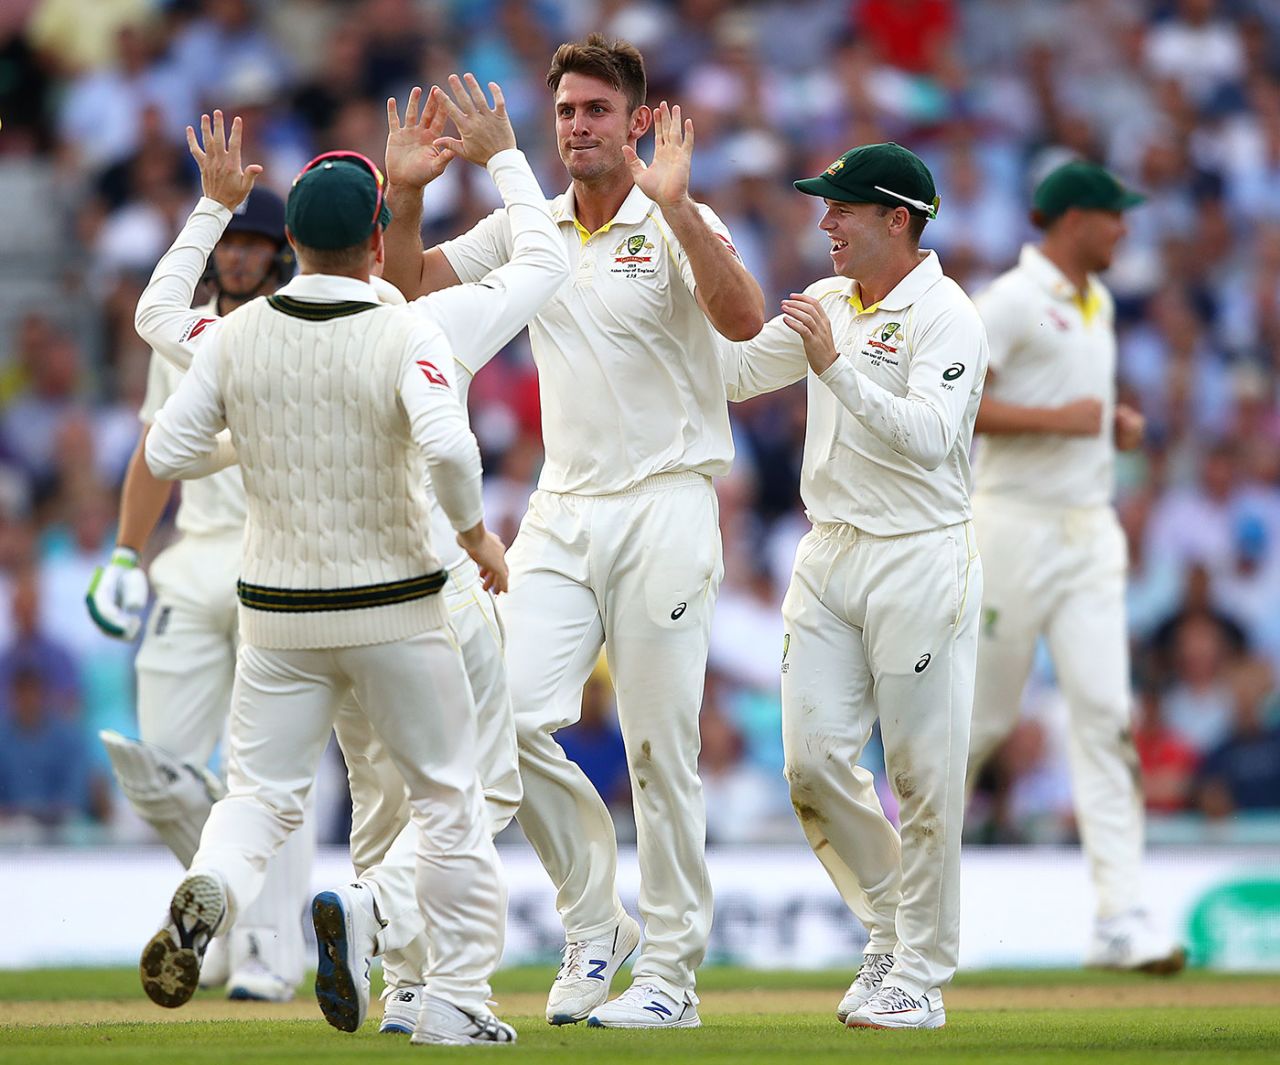 Mitchell Marsh bagged the big wicket of Jonny Bairstow, England v Australia, 5th Test, The Oval, September 12, 2019